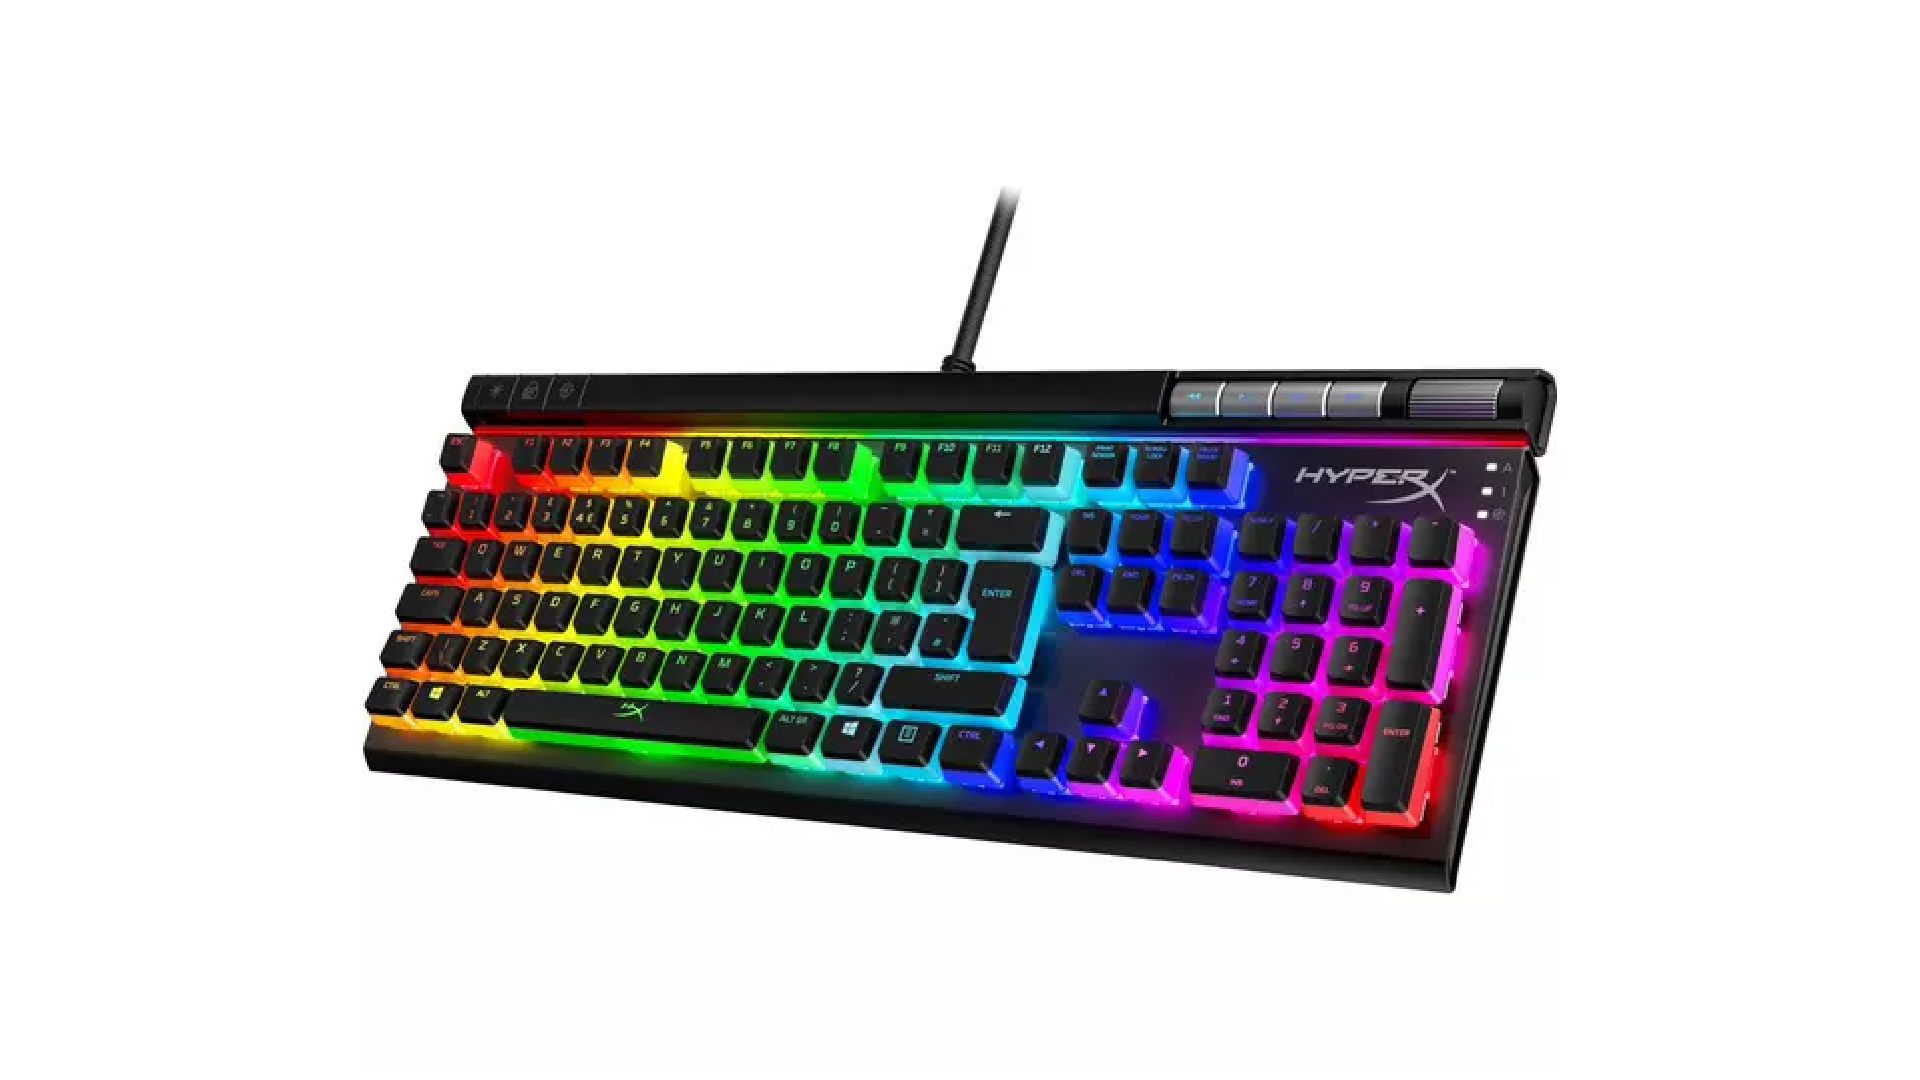 Image for Save £60 on this Hyper X Alloy Elite 2 Gaming Keyboard from Currys